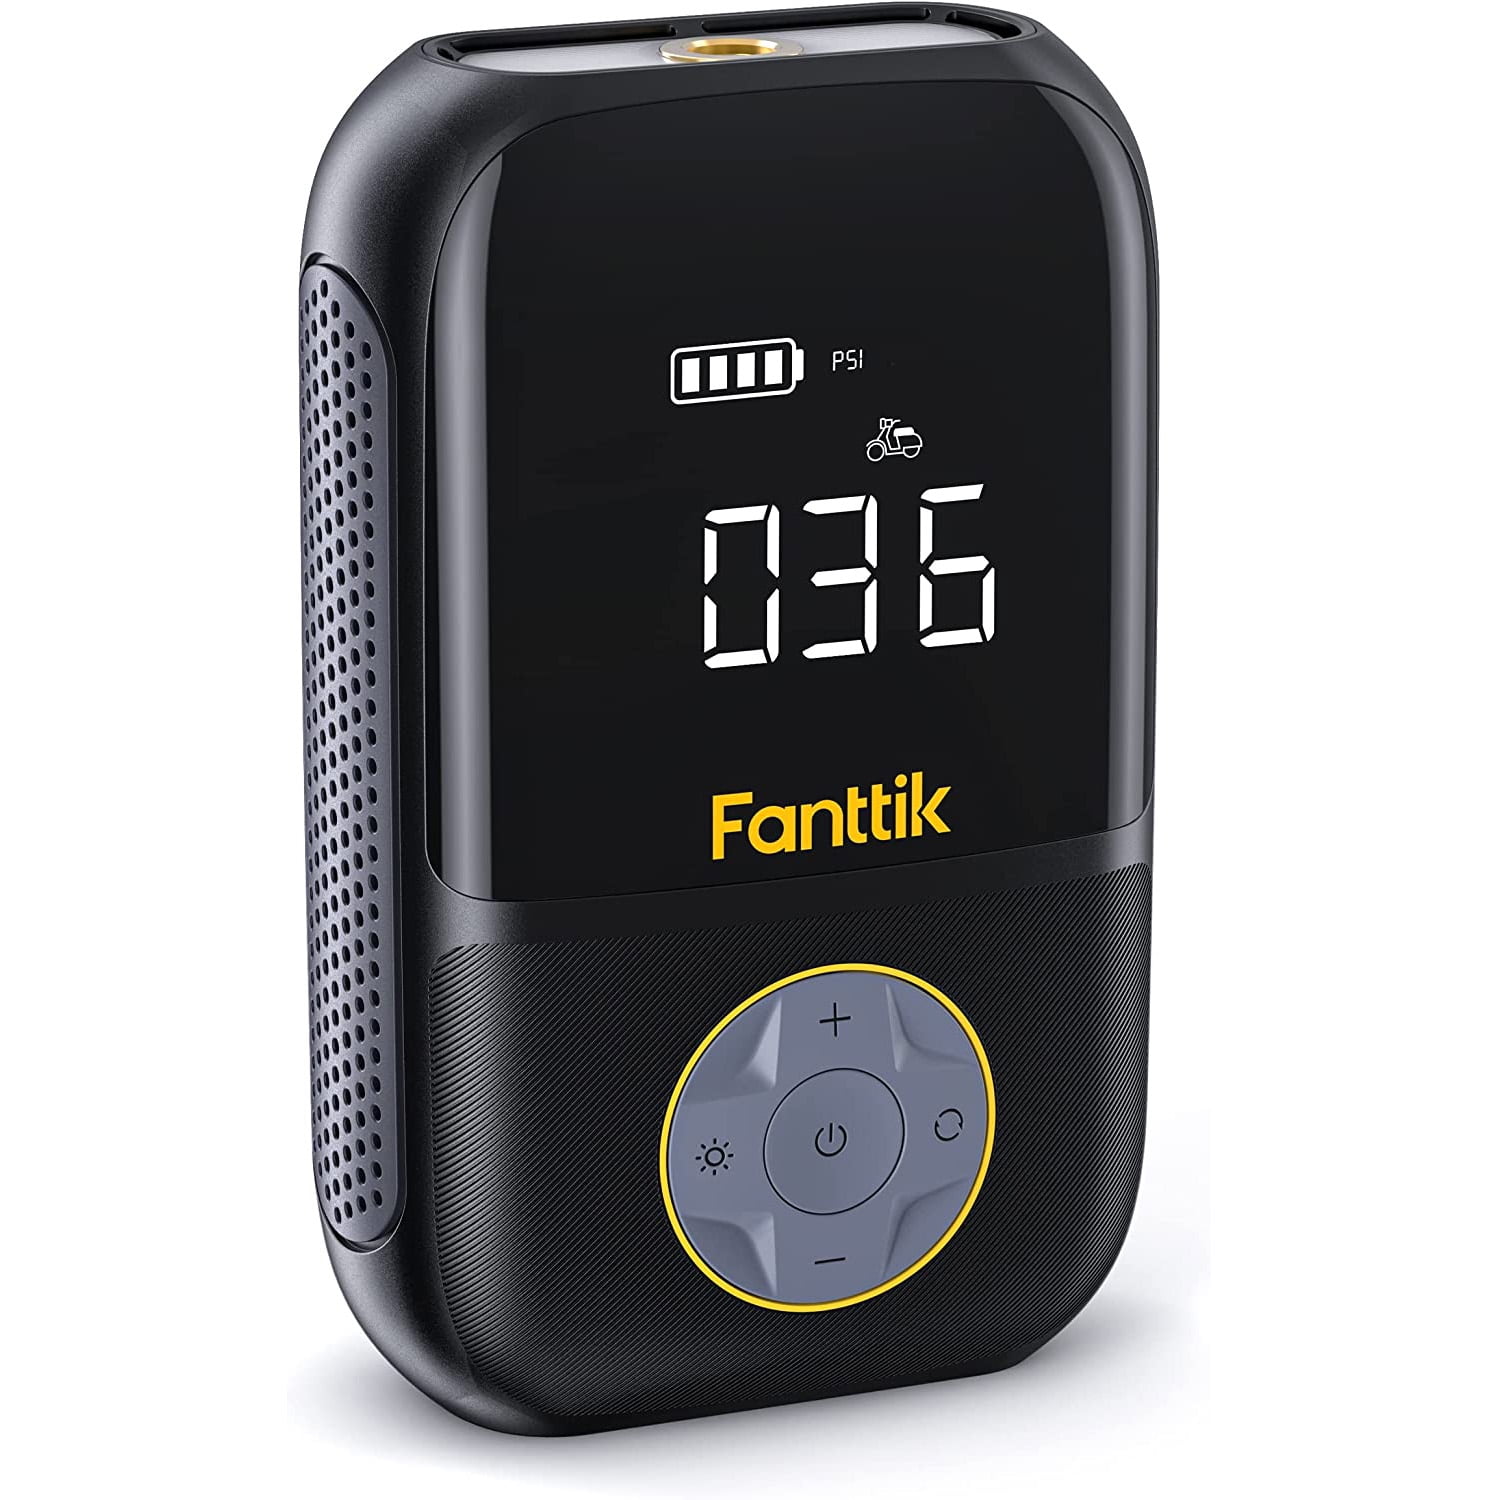  Fanttik X8 Portable Tire Inflator, Lightweight for Motorcycle  tire, Cordless Air Compressor Pump, Rechargeable Battery, 150PSI with  Digital Screen and LED for E-Bike, Bicycle, Car : Automotive